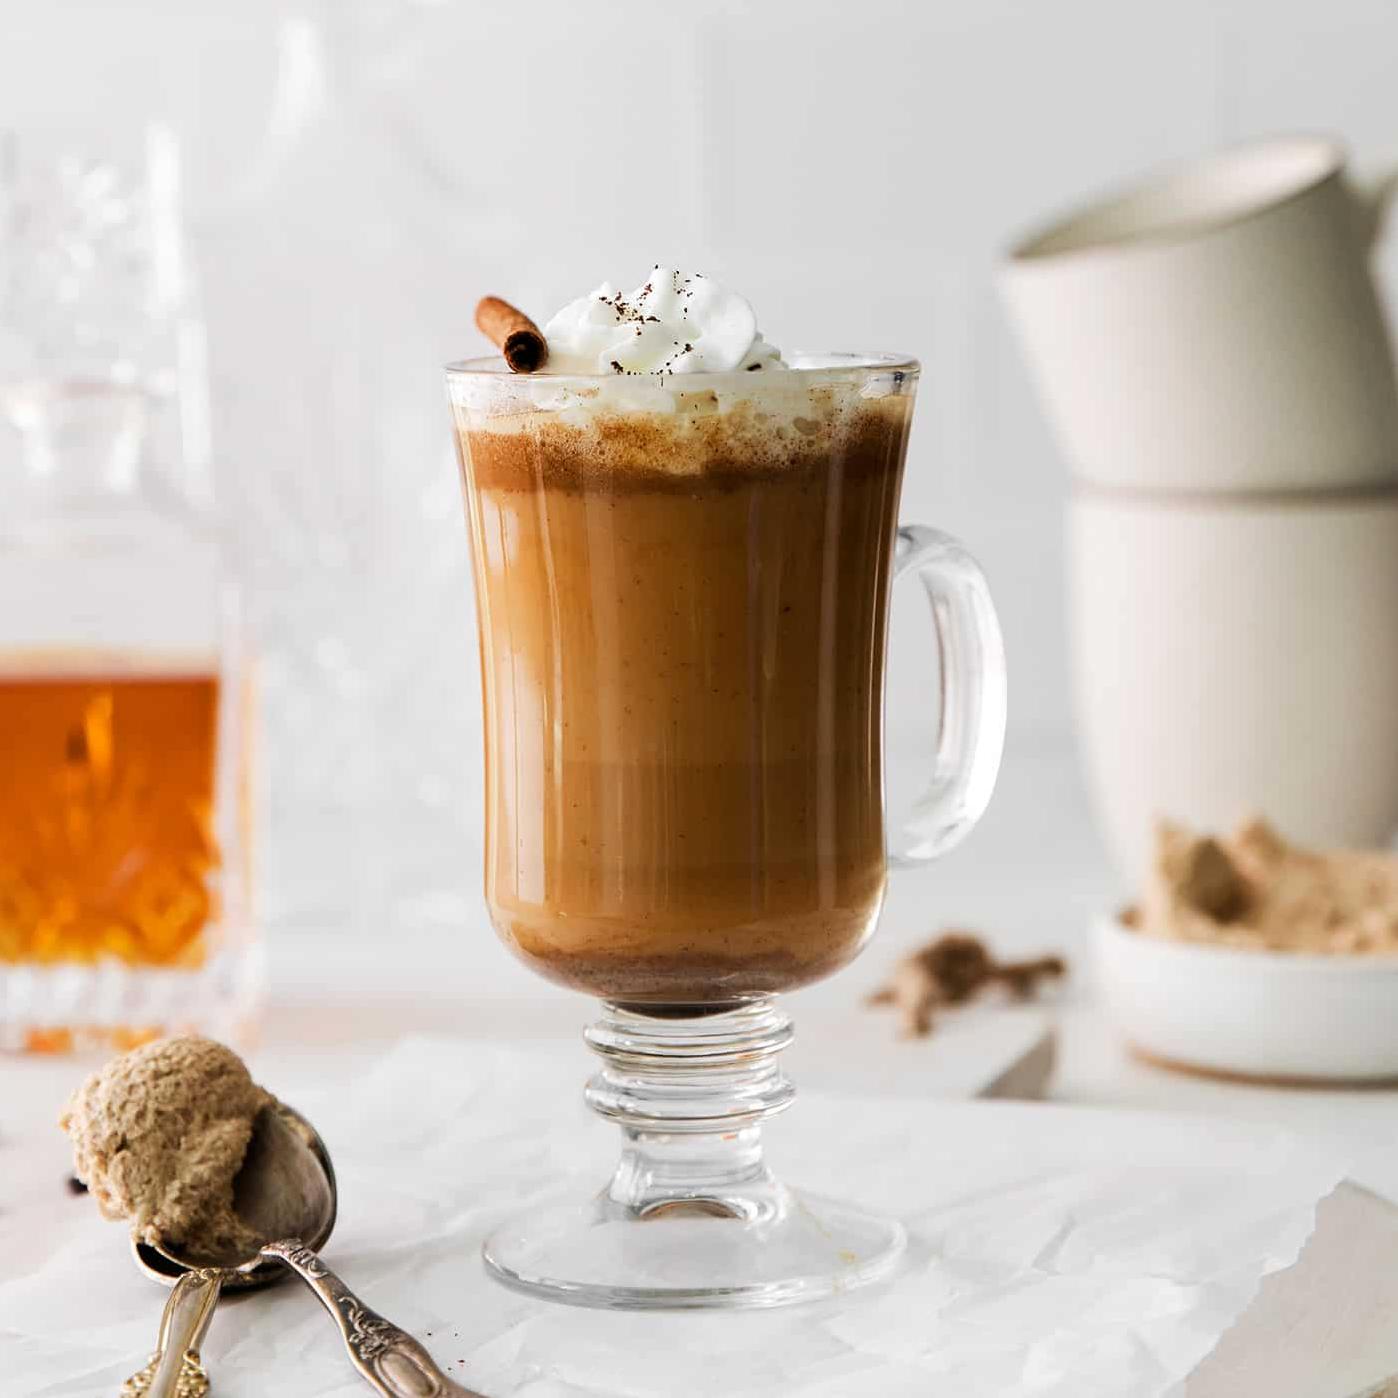  Who needs a fancy latte when you can make this at home?